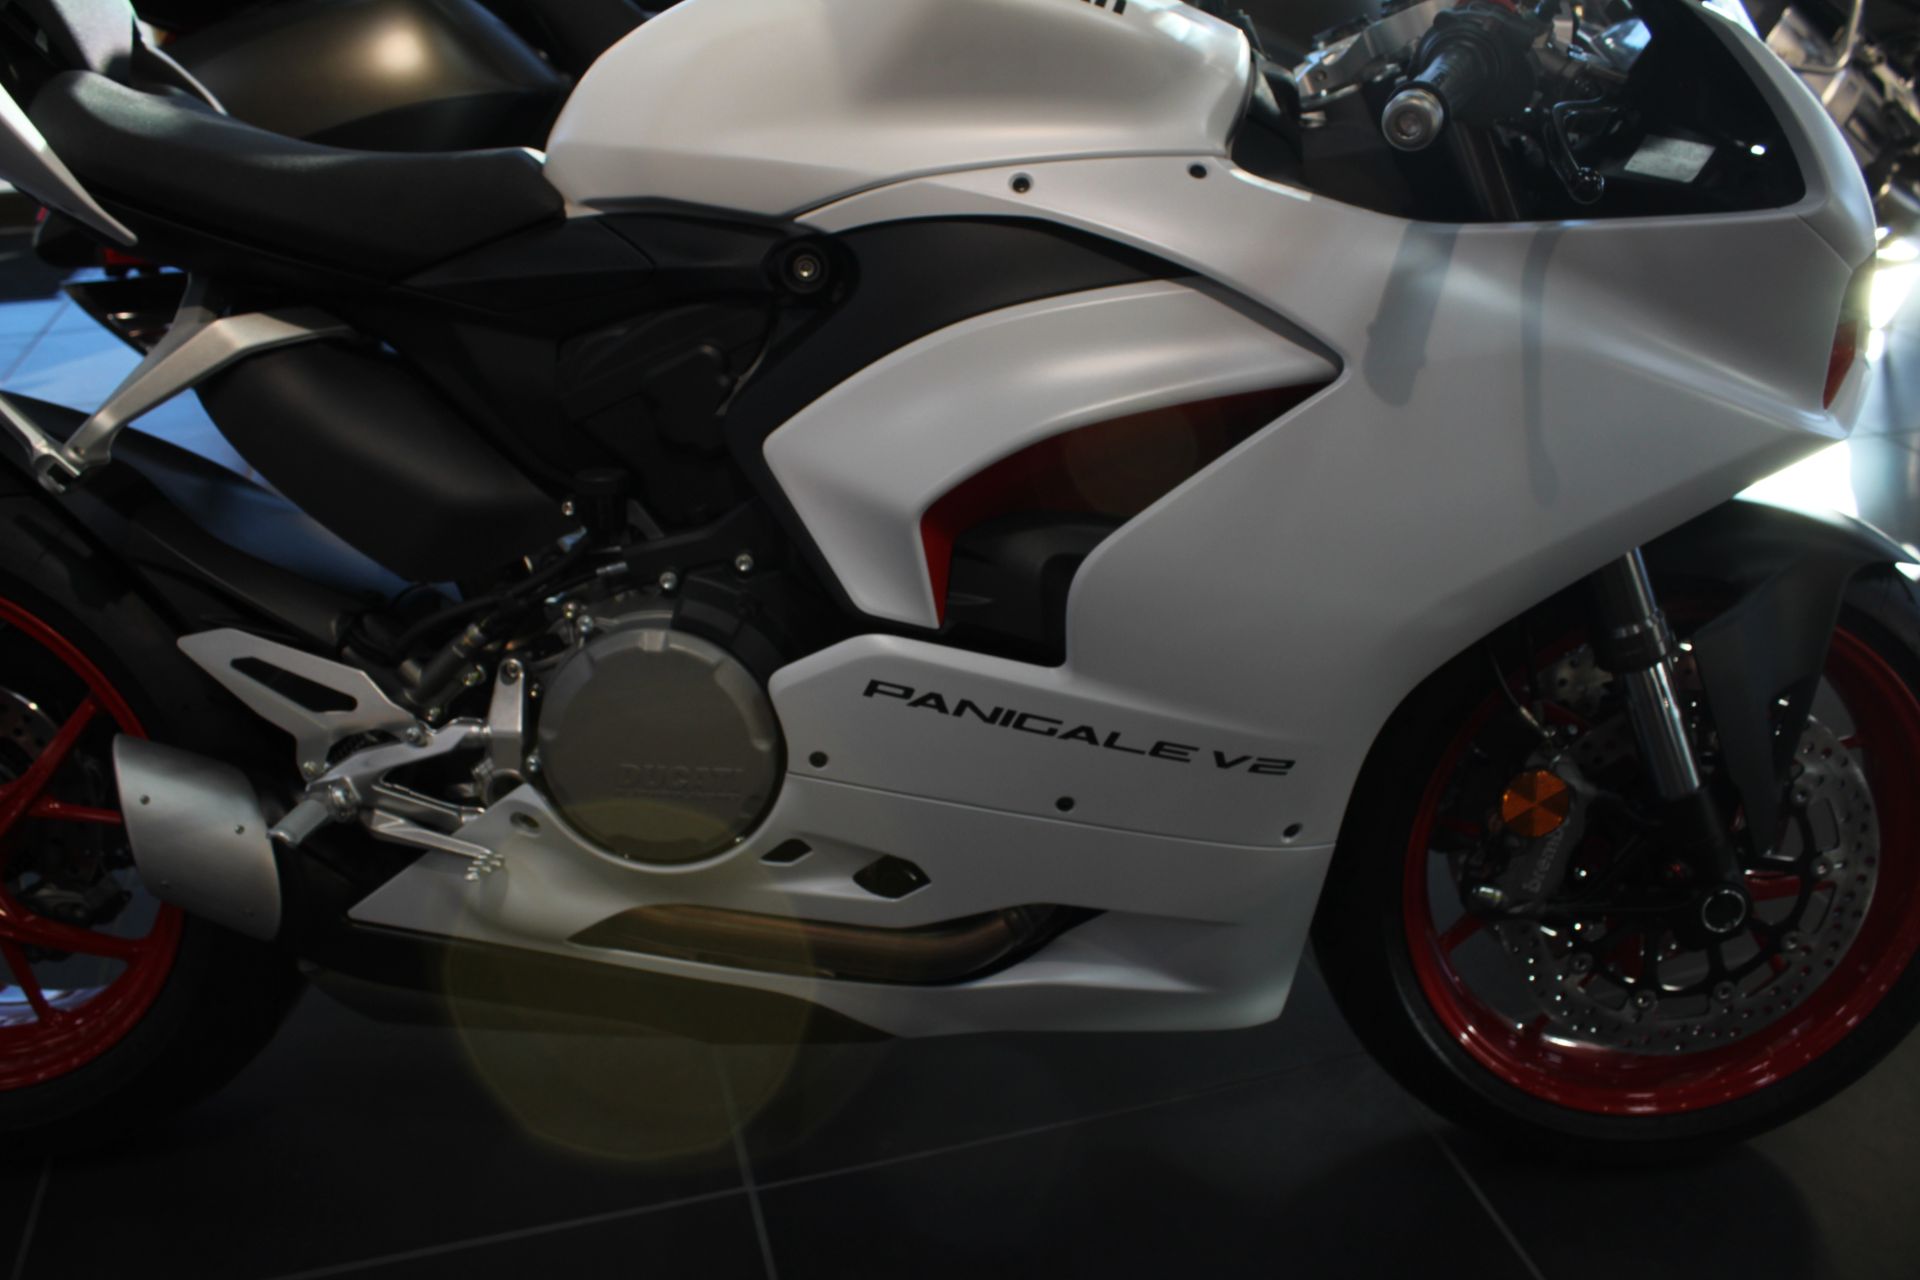 2023 Ducati Panigale V2 in West Allis, Wisconsin - Photo 7